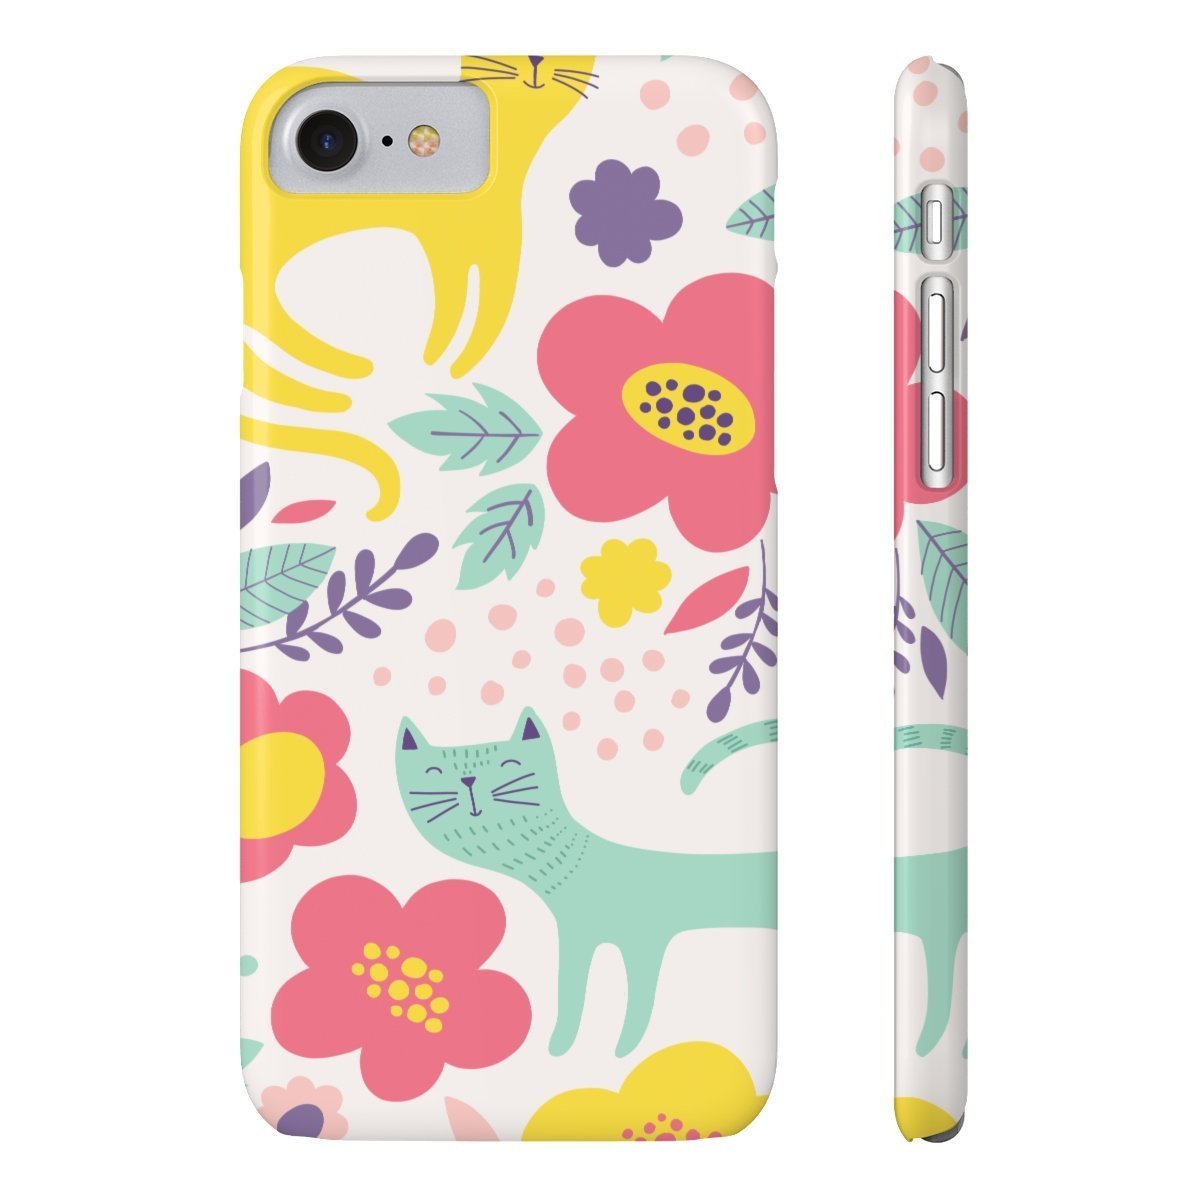 Cute Gifts for Cat Ladies, Cat Phone Case for iPhones with a Colorful Cat Print